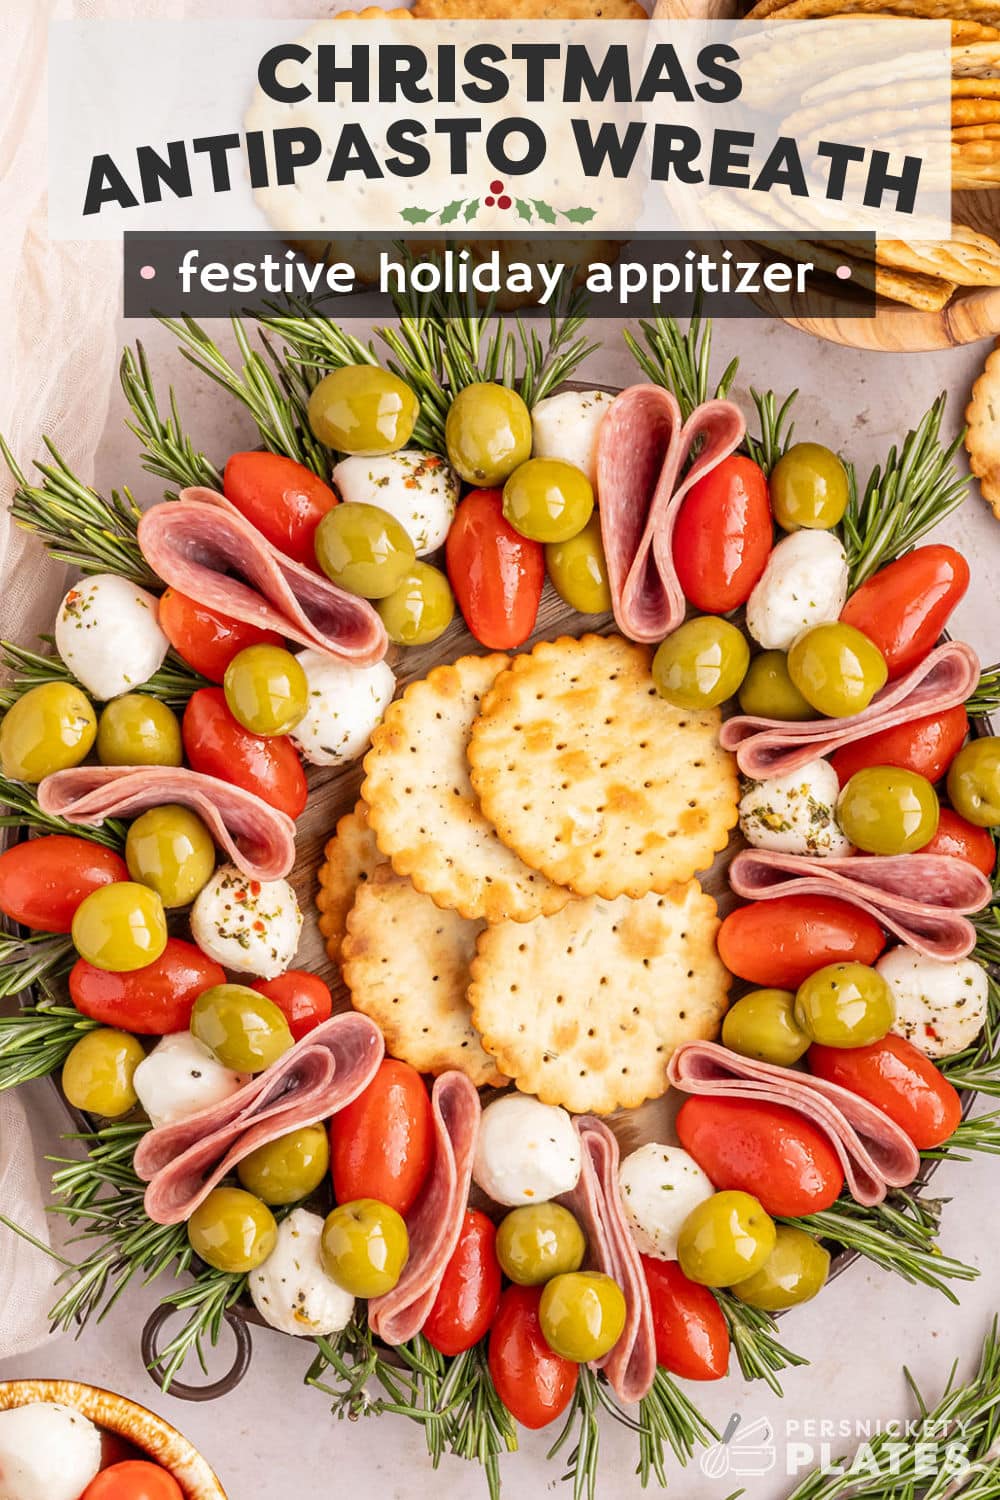 Learn to make this adorably festive and easy Christmas Antipasto Wreath with salami, mozzarella cheese, briny olives, and fresh sprigs of rosemary! This fun and tasty platter is as customizable as it gets and comes together in just minutes. The antipasto skewers are always a huge hit and the perfect way to keep your party guests satisfied before the main meal! | www.persnicketyplates.com